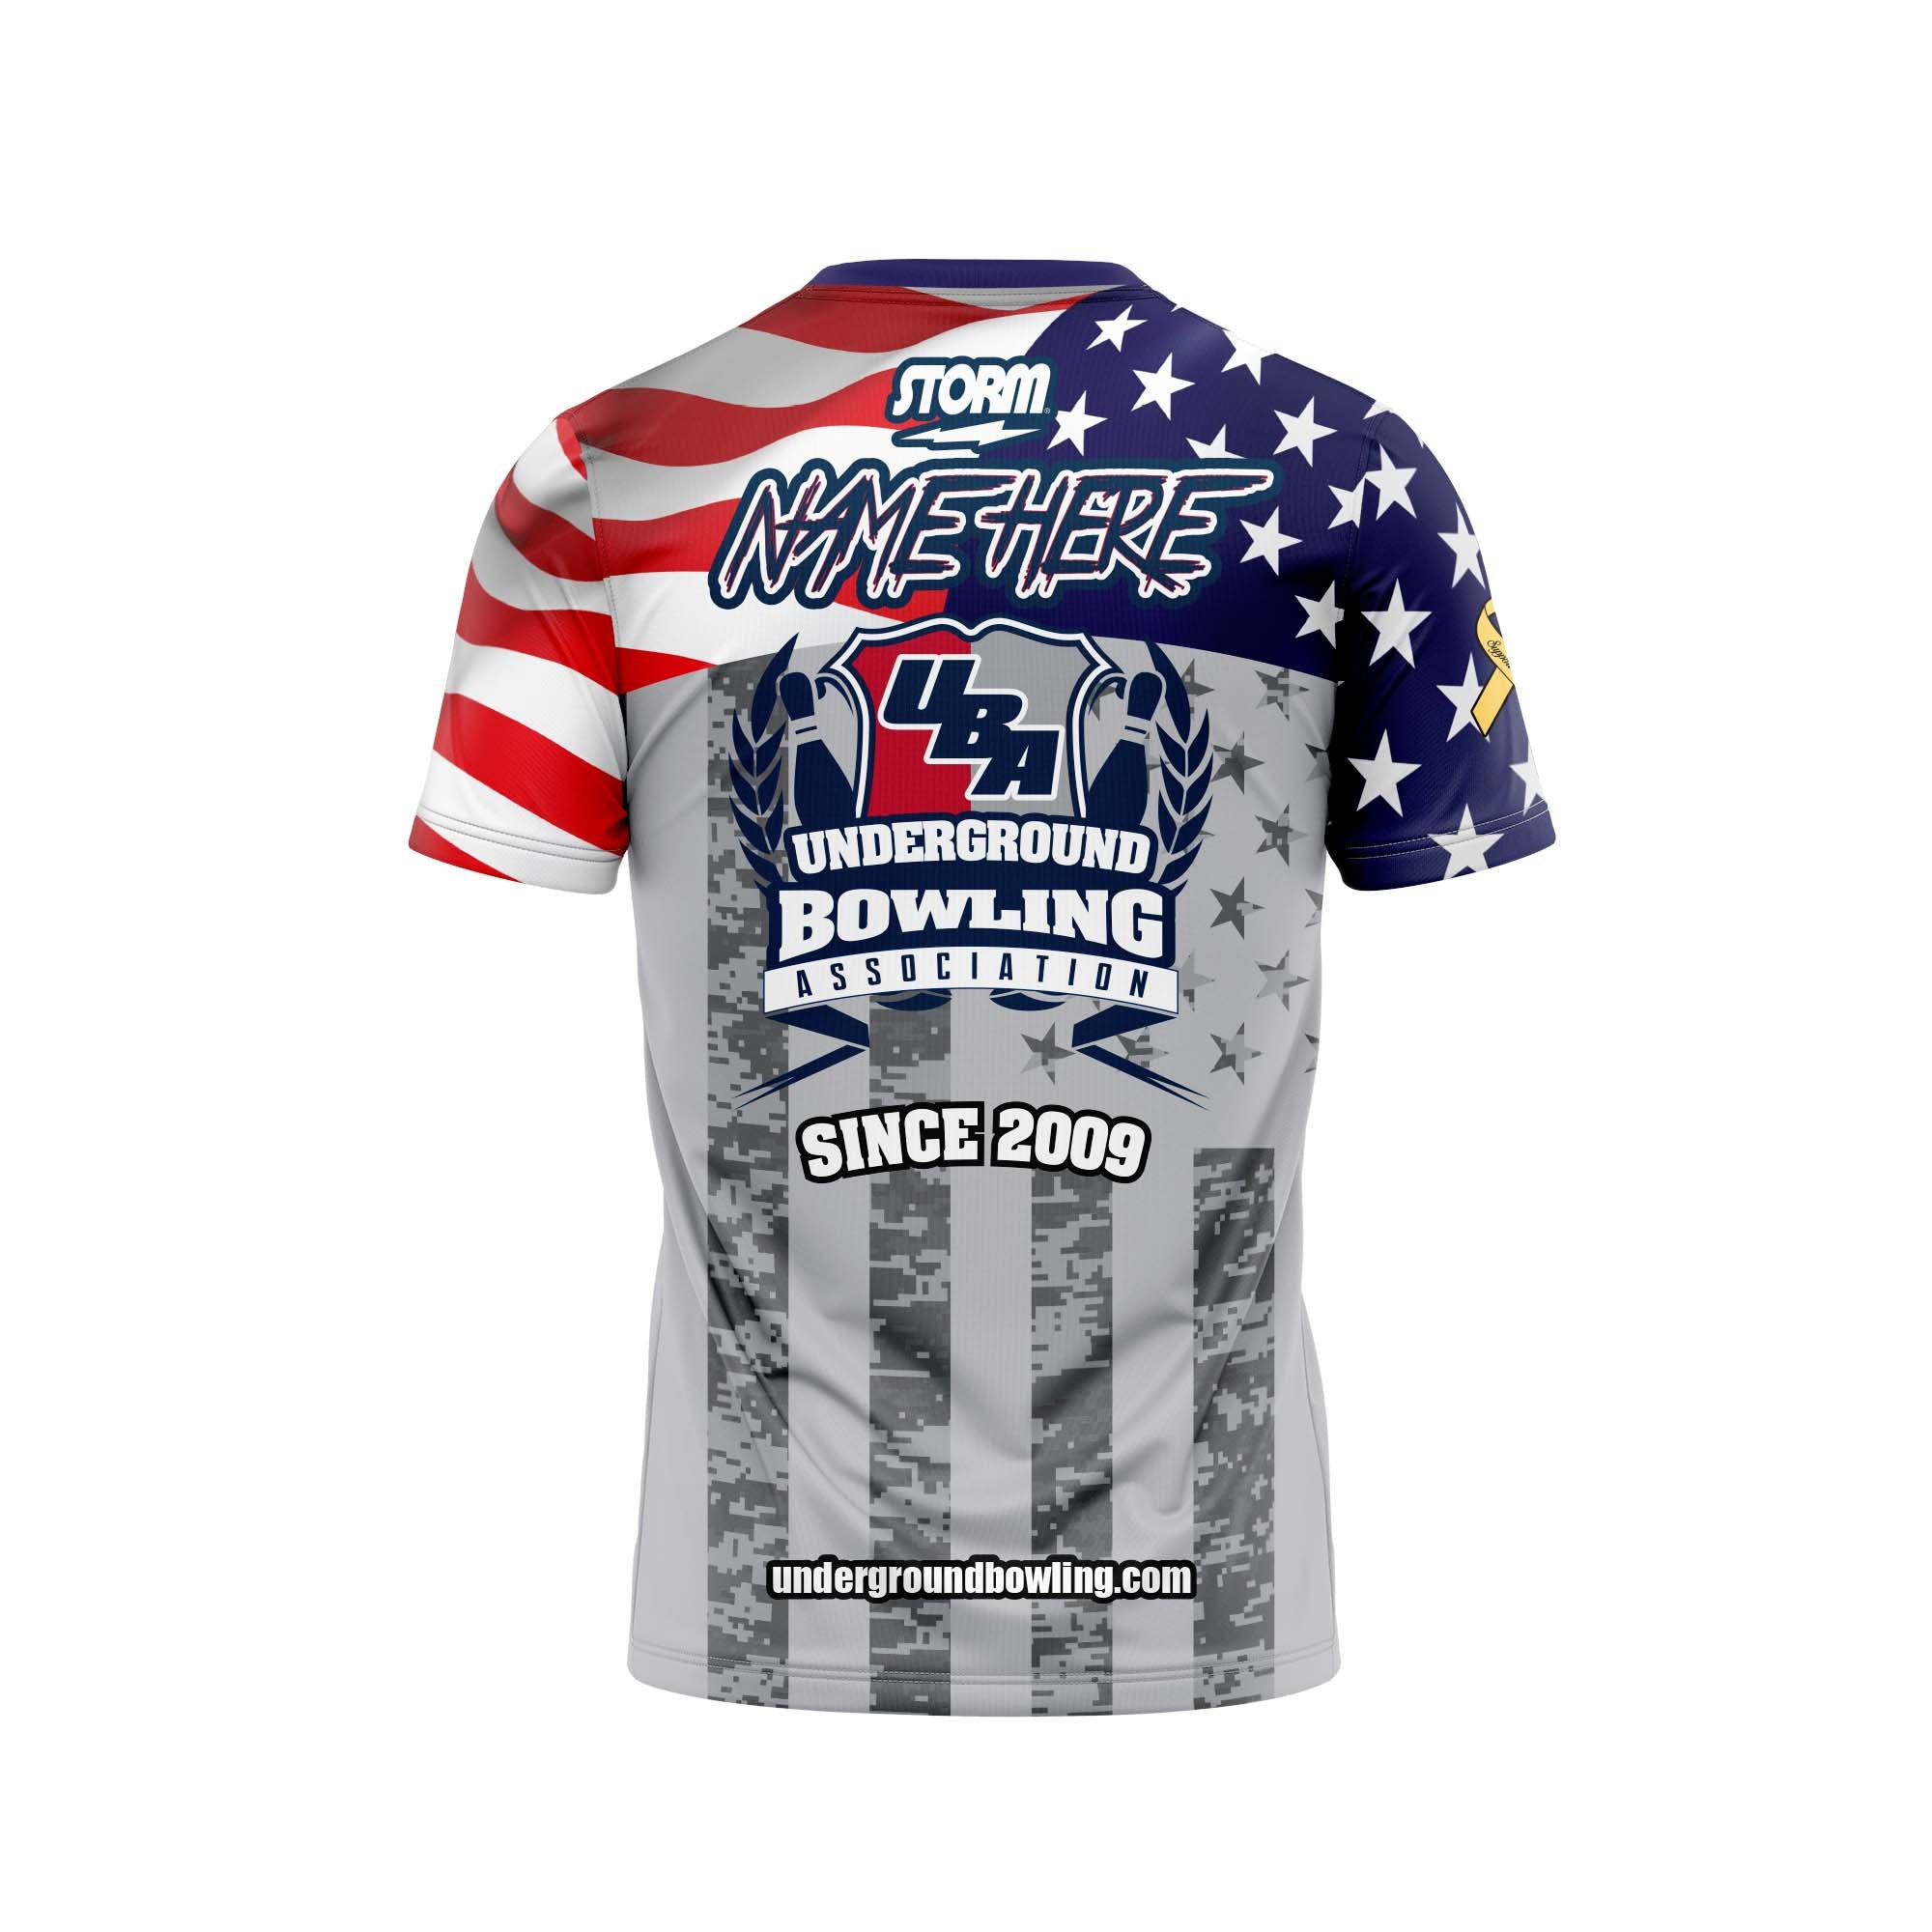 Spartanburg Savages Military Jersey